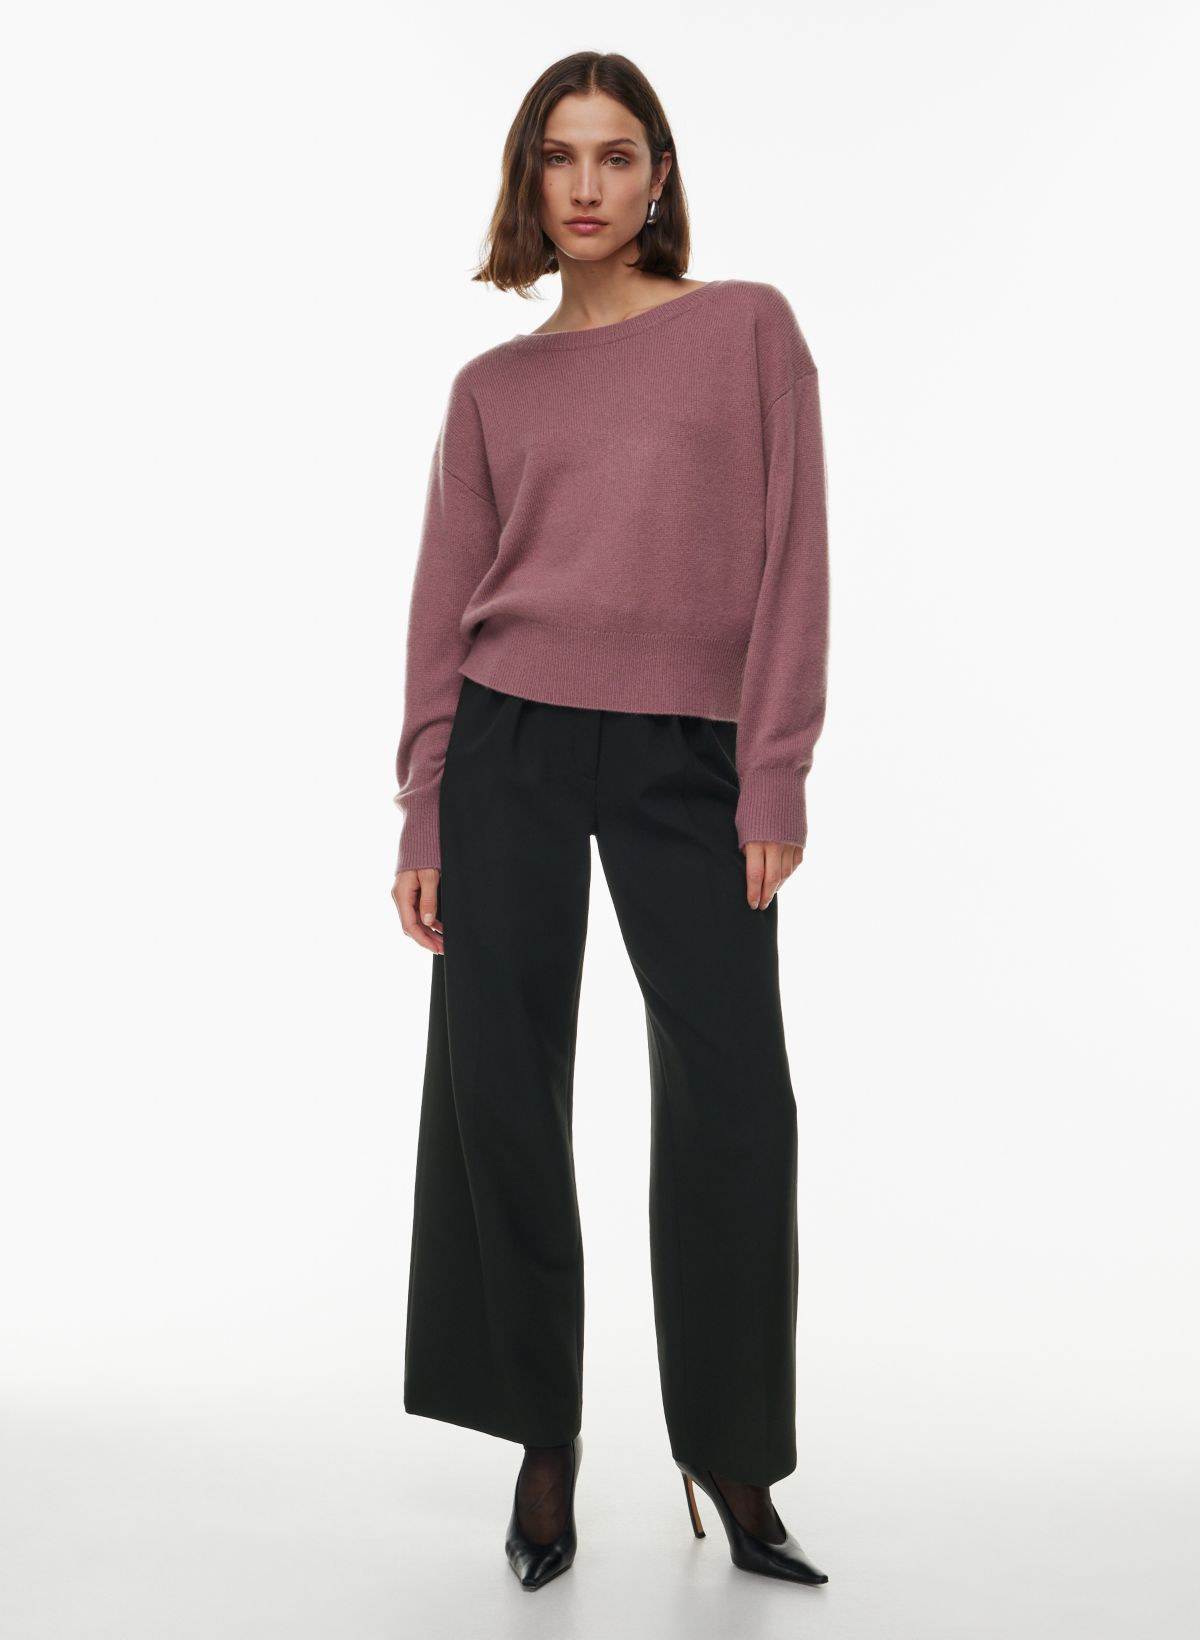 Shoppers Say This New $28 Sweater Is Better Than Cashmere